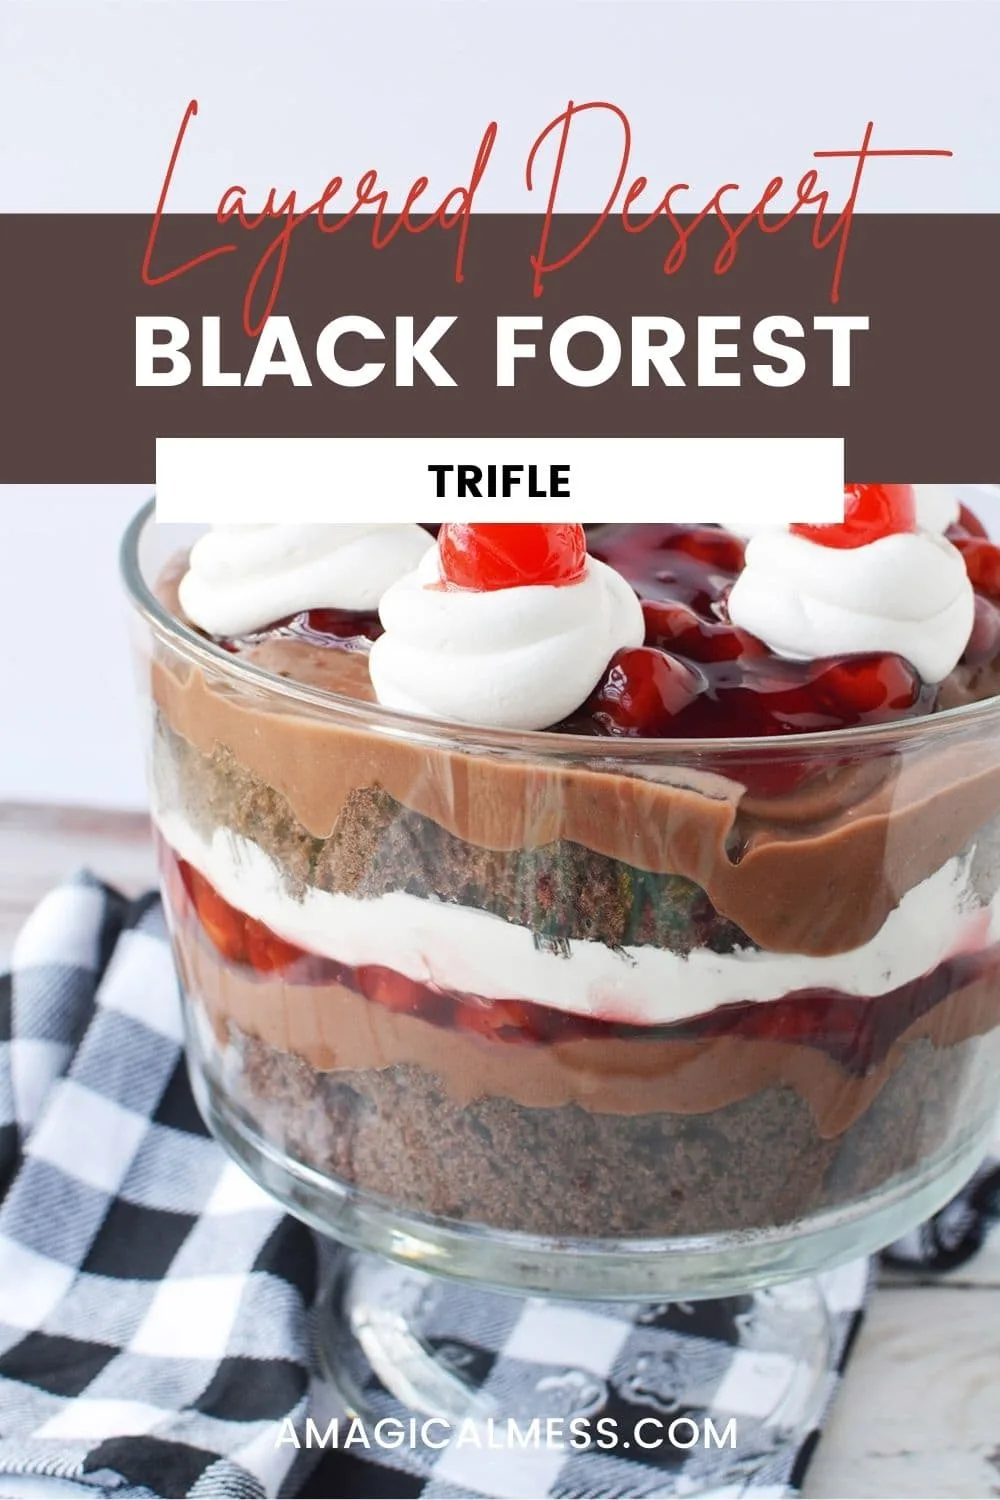 Layers of cake, whipped cream, and cherries in a trifle bowl.